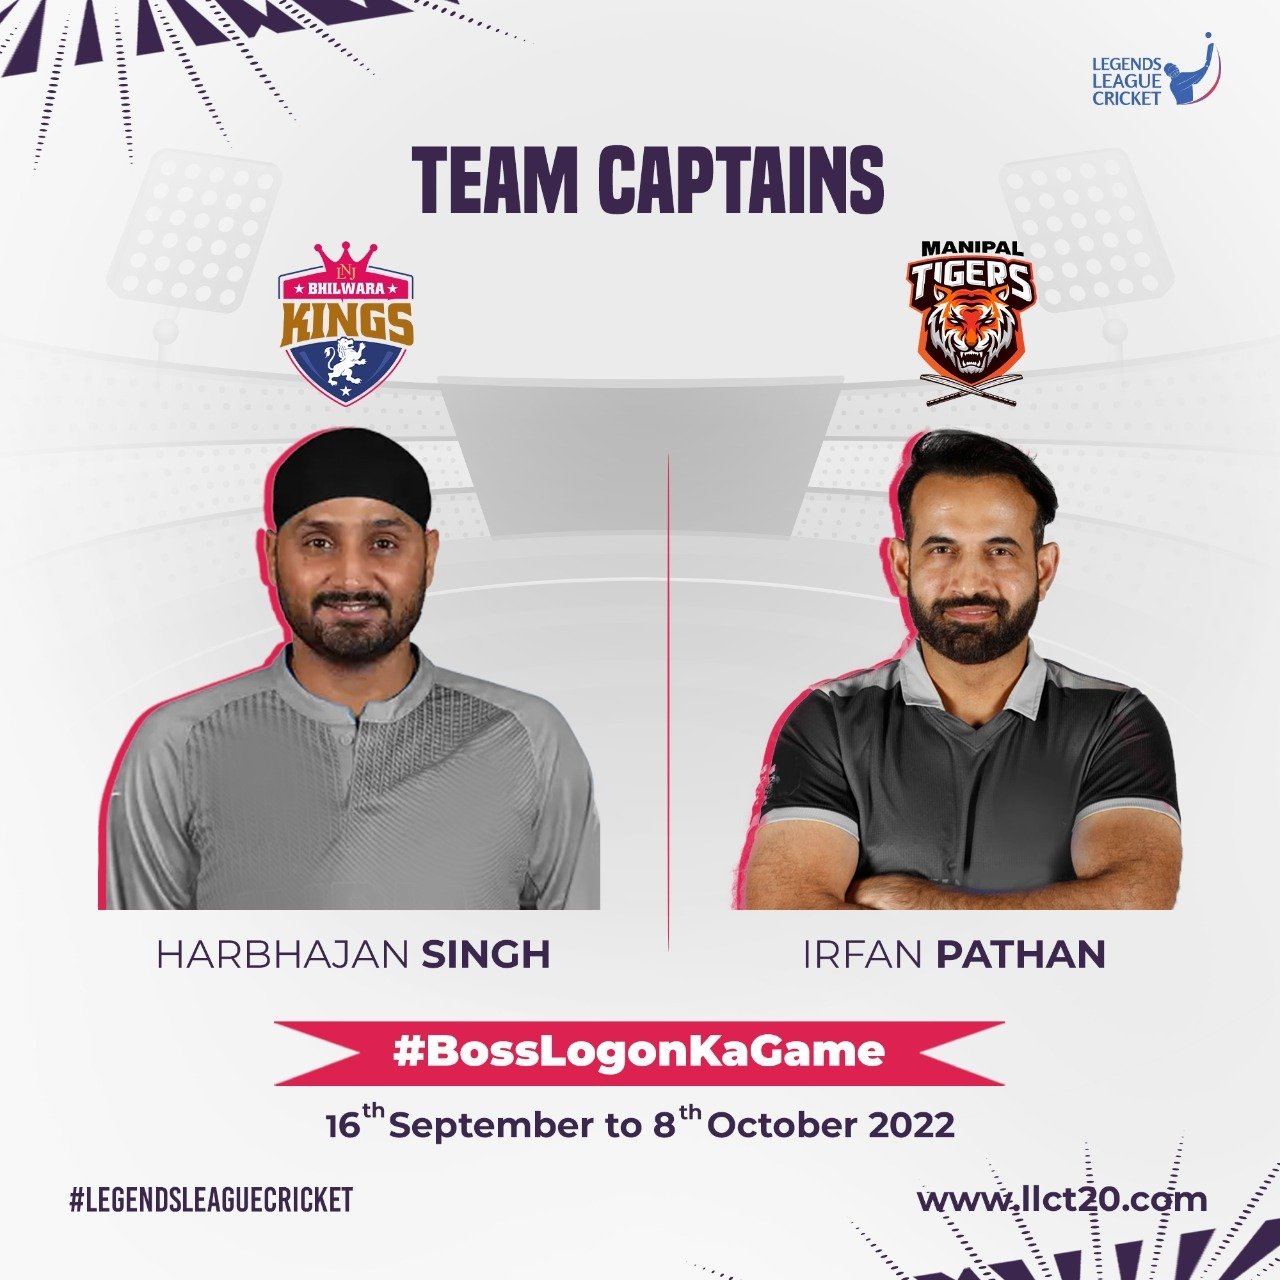 Harbhajan Singh and Irfan Pathan to lead the last two franchise team of Legends League Cricket